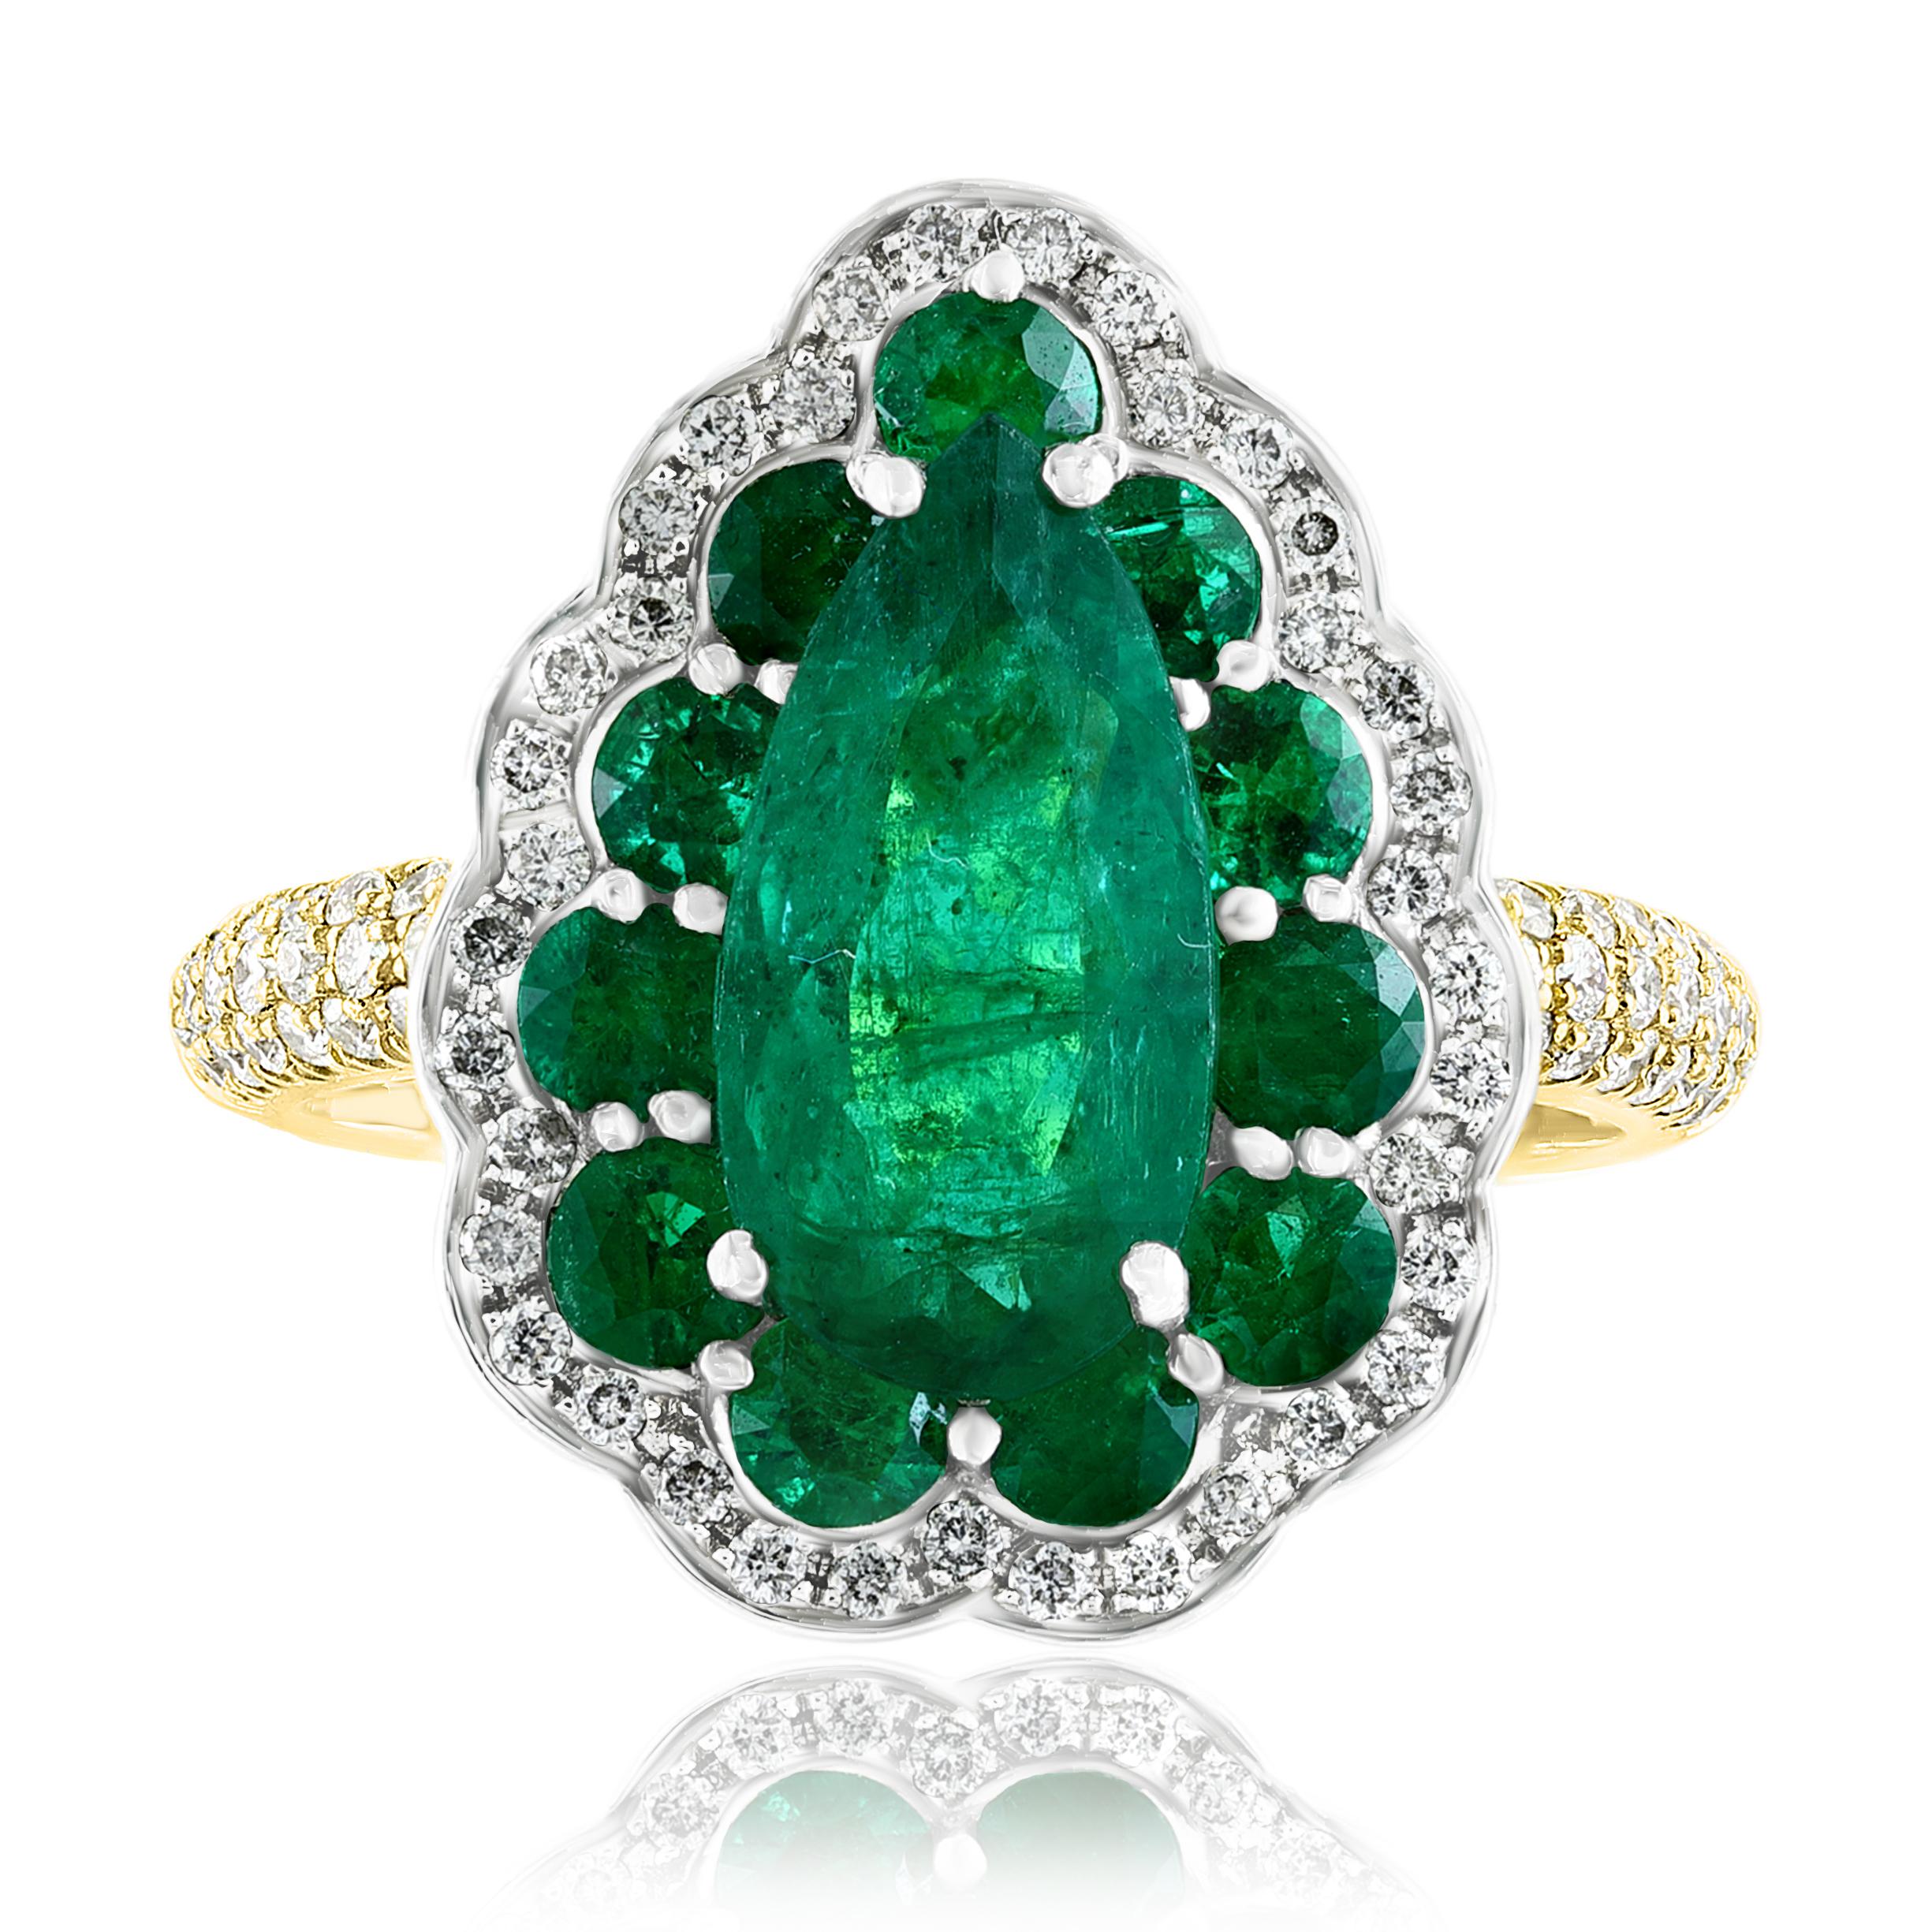 This cocktail ring features Pear shape Emerald weighing 3.04 carats total and 80 round brilliant diamonds weighing 0.53 carats total. Surrounding the center stone there are 11 round brilliant cut emeralds. Made with 18k yellow gold. 

Size 6.5 US